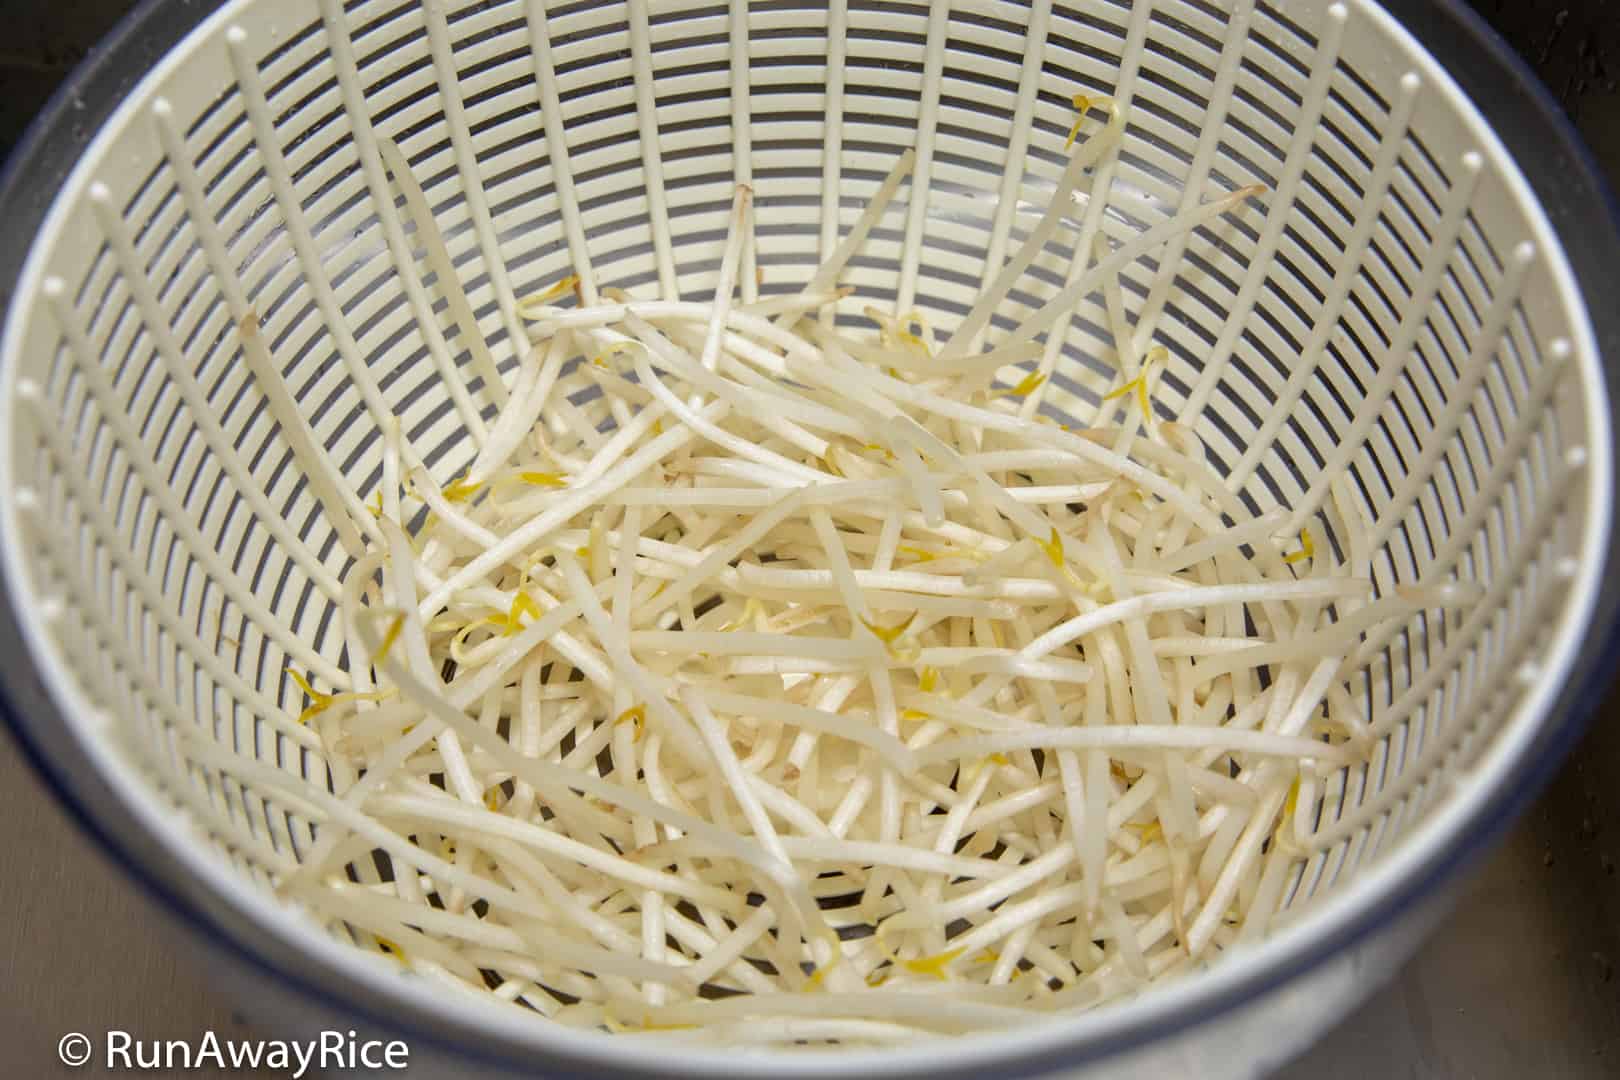 http://runawayrice.com/wp-content/uploads/2018/07/Salad-Spinner-Spin-Bean-Sprouts.jpg